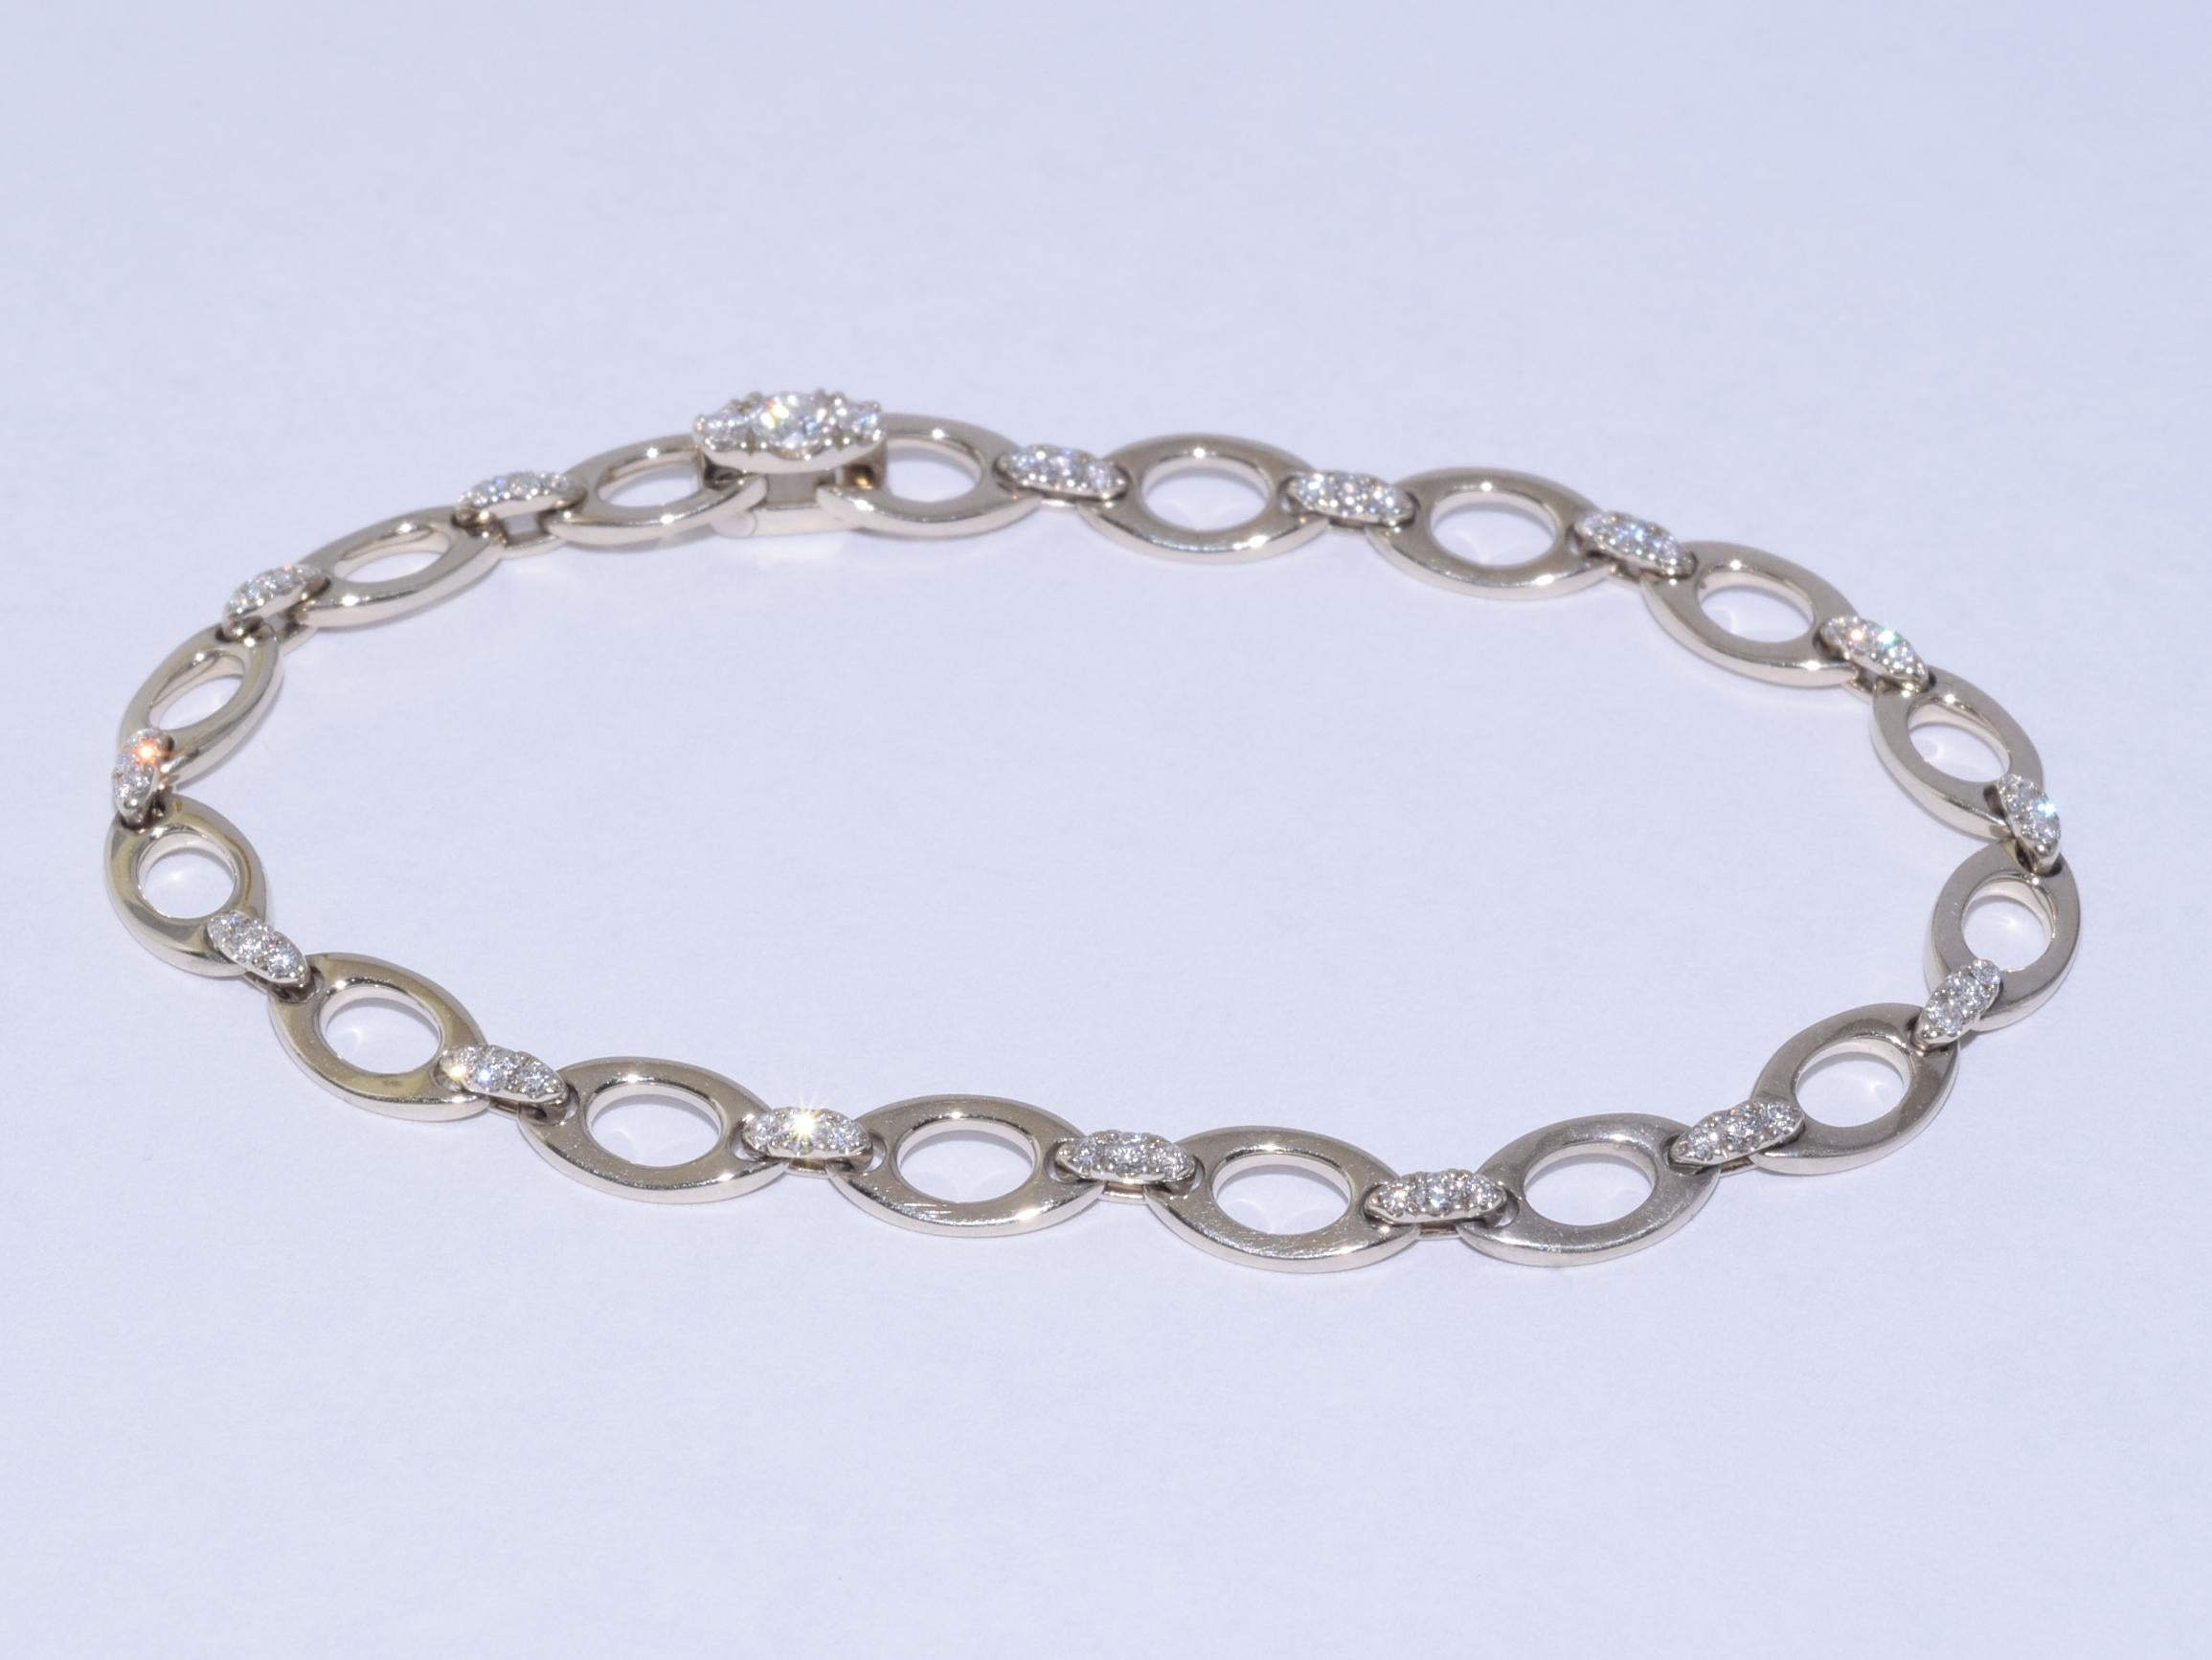 Navette shaped links formed in 18 karat white gold are joined with diamond set bar links accented with 48 round diamonds totaling approximately 0.55 carats. The bracelet measures 6.5 inches in length and 1/4 of an inch wide. This style can be worn